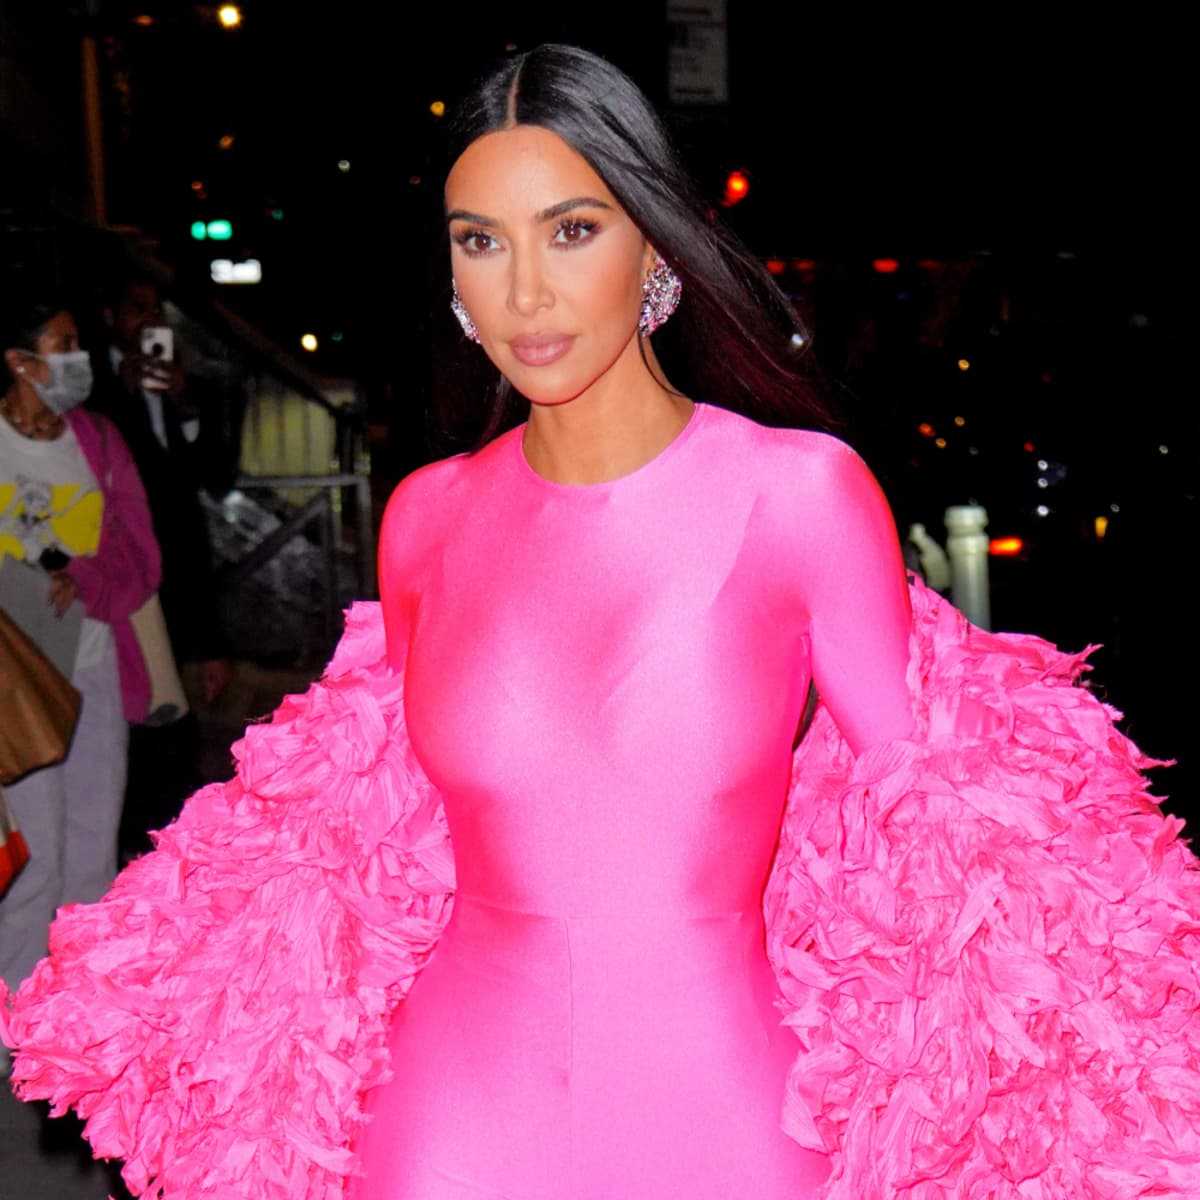 Kim Kardashian gets fined $1.26 million by the SEC for touting